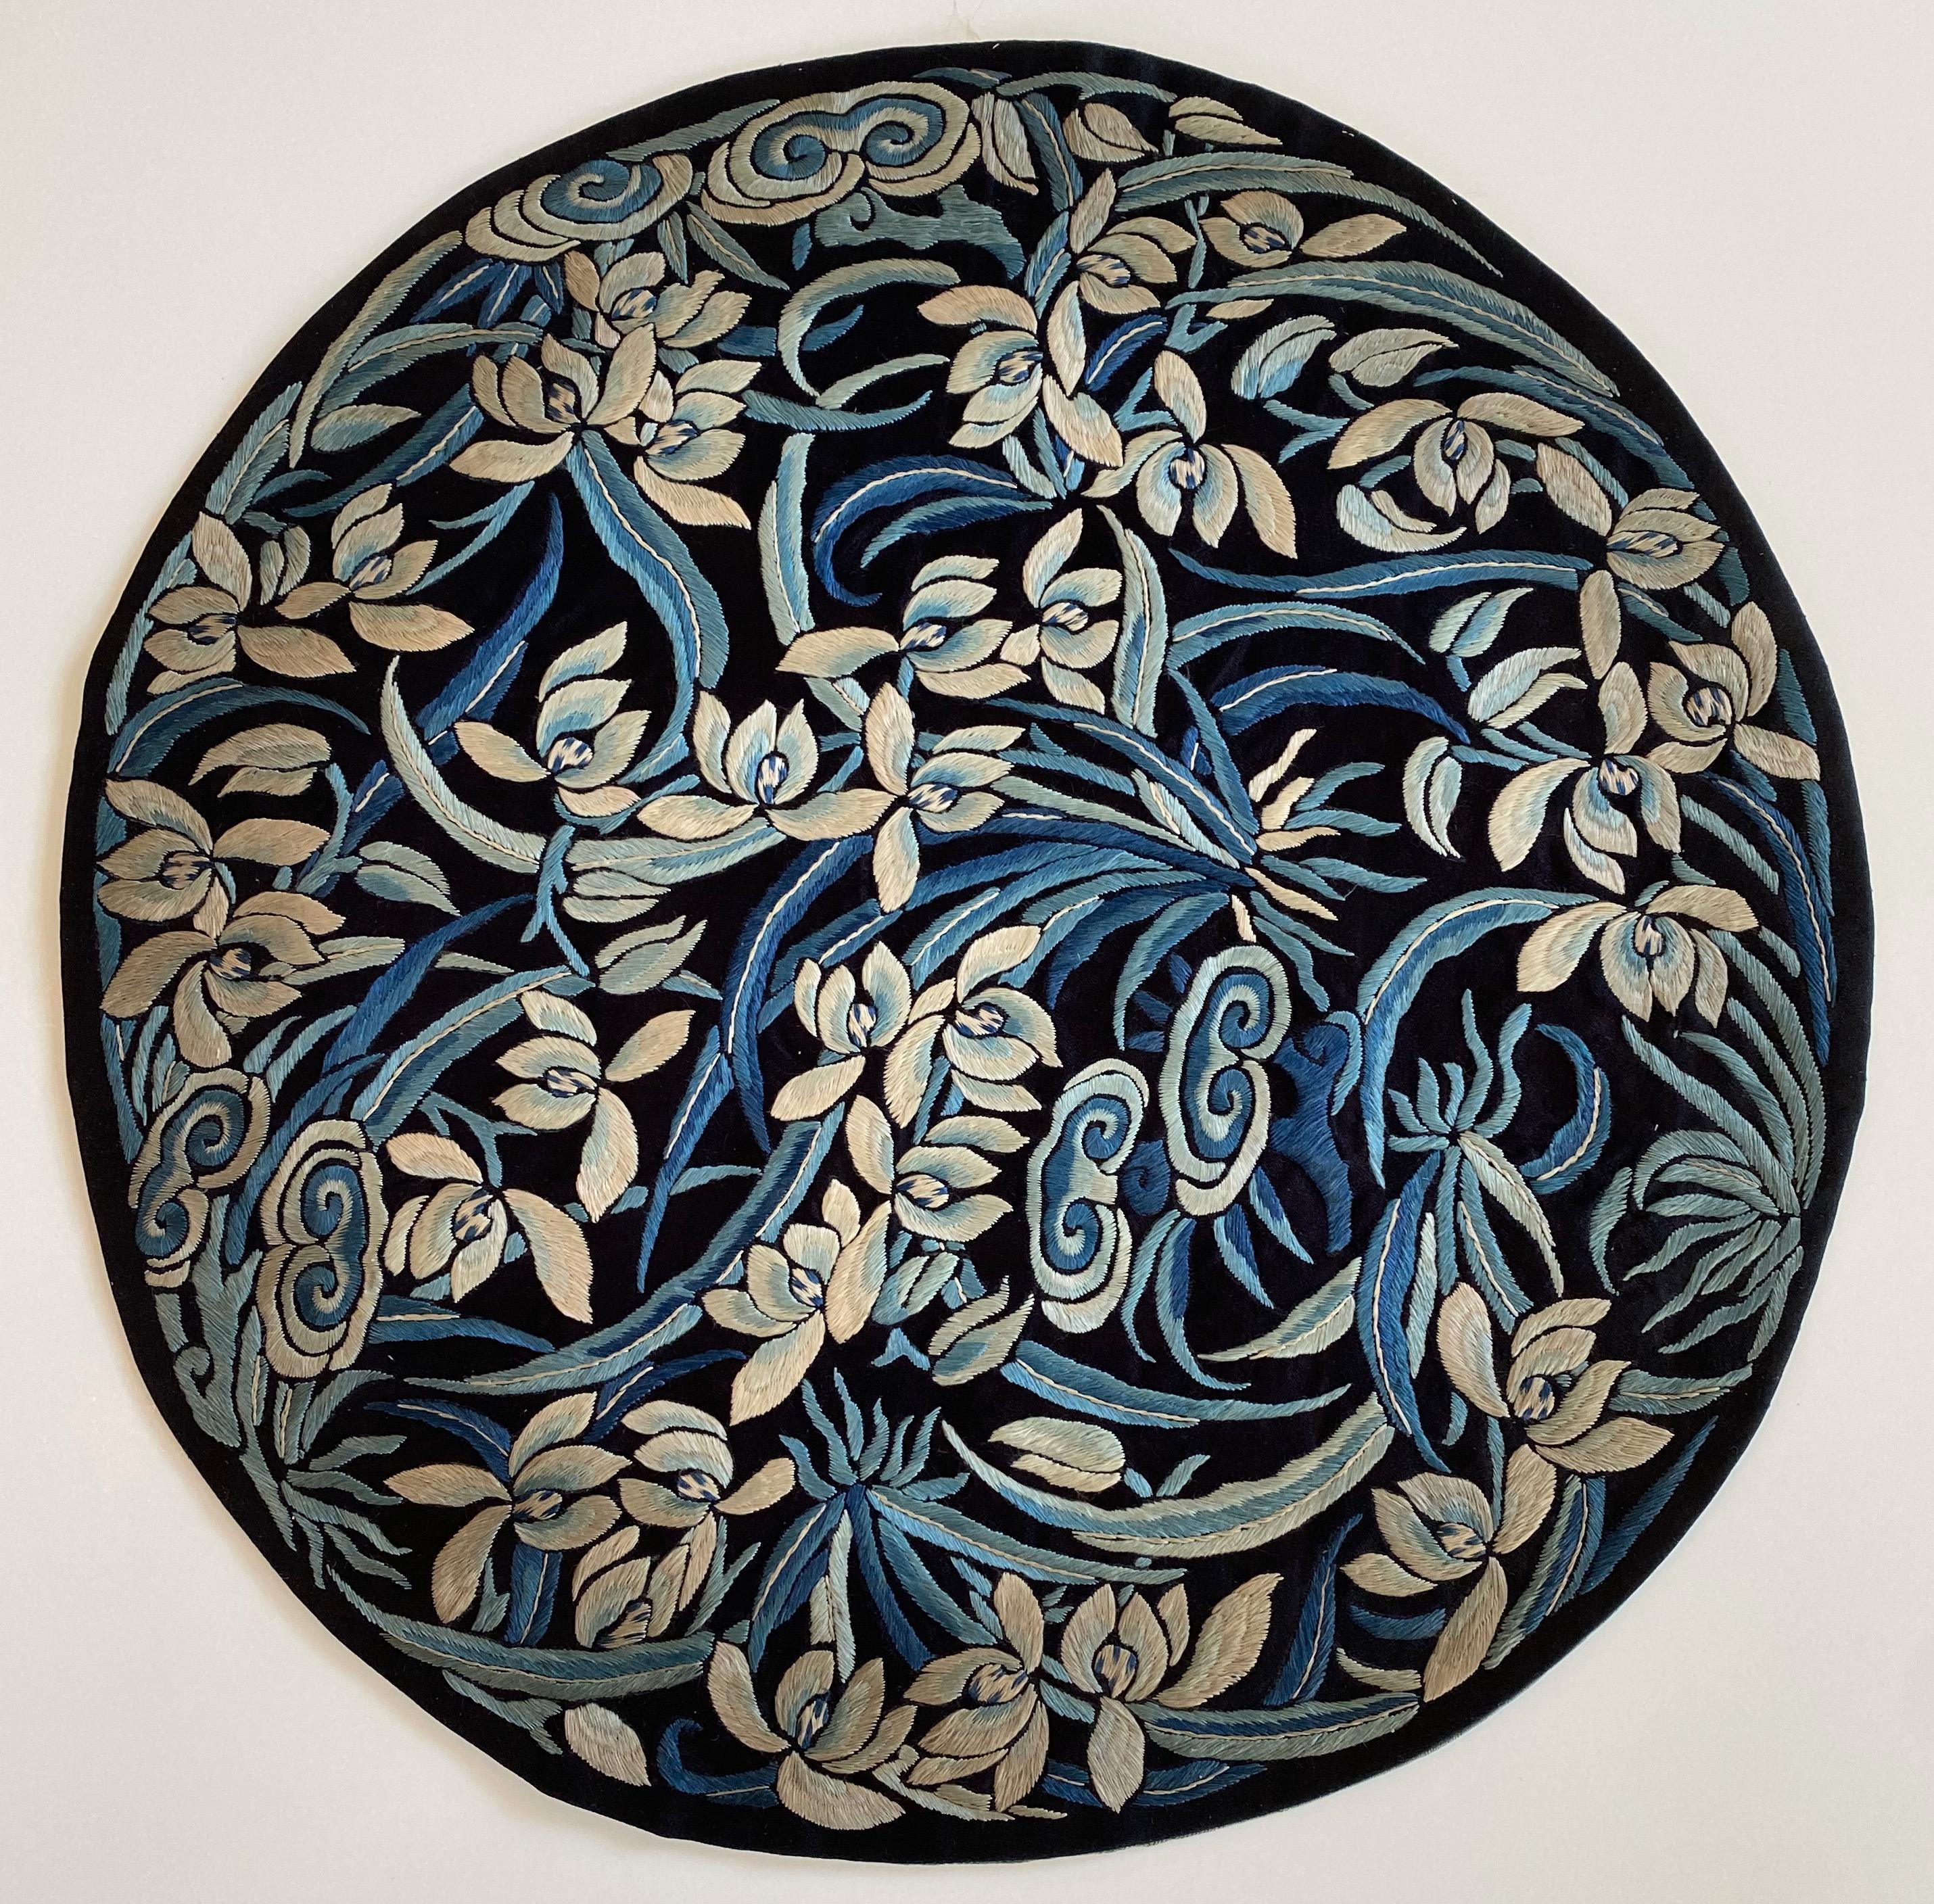 Qing Dynasty embroidered silk roundel depicting a profusion of irises. 

The flowers are embroidered in satin stitch in various shades of blue and ivory on a dark blue silk background. A few Lingzhi mushrooms -- the mushrooms of immortality -- are